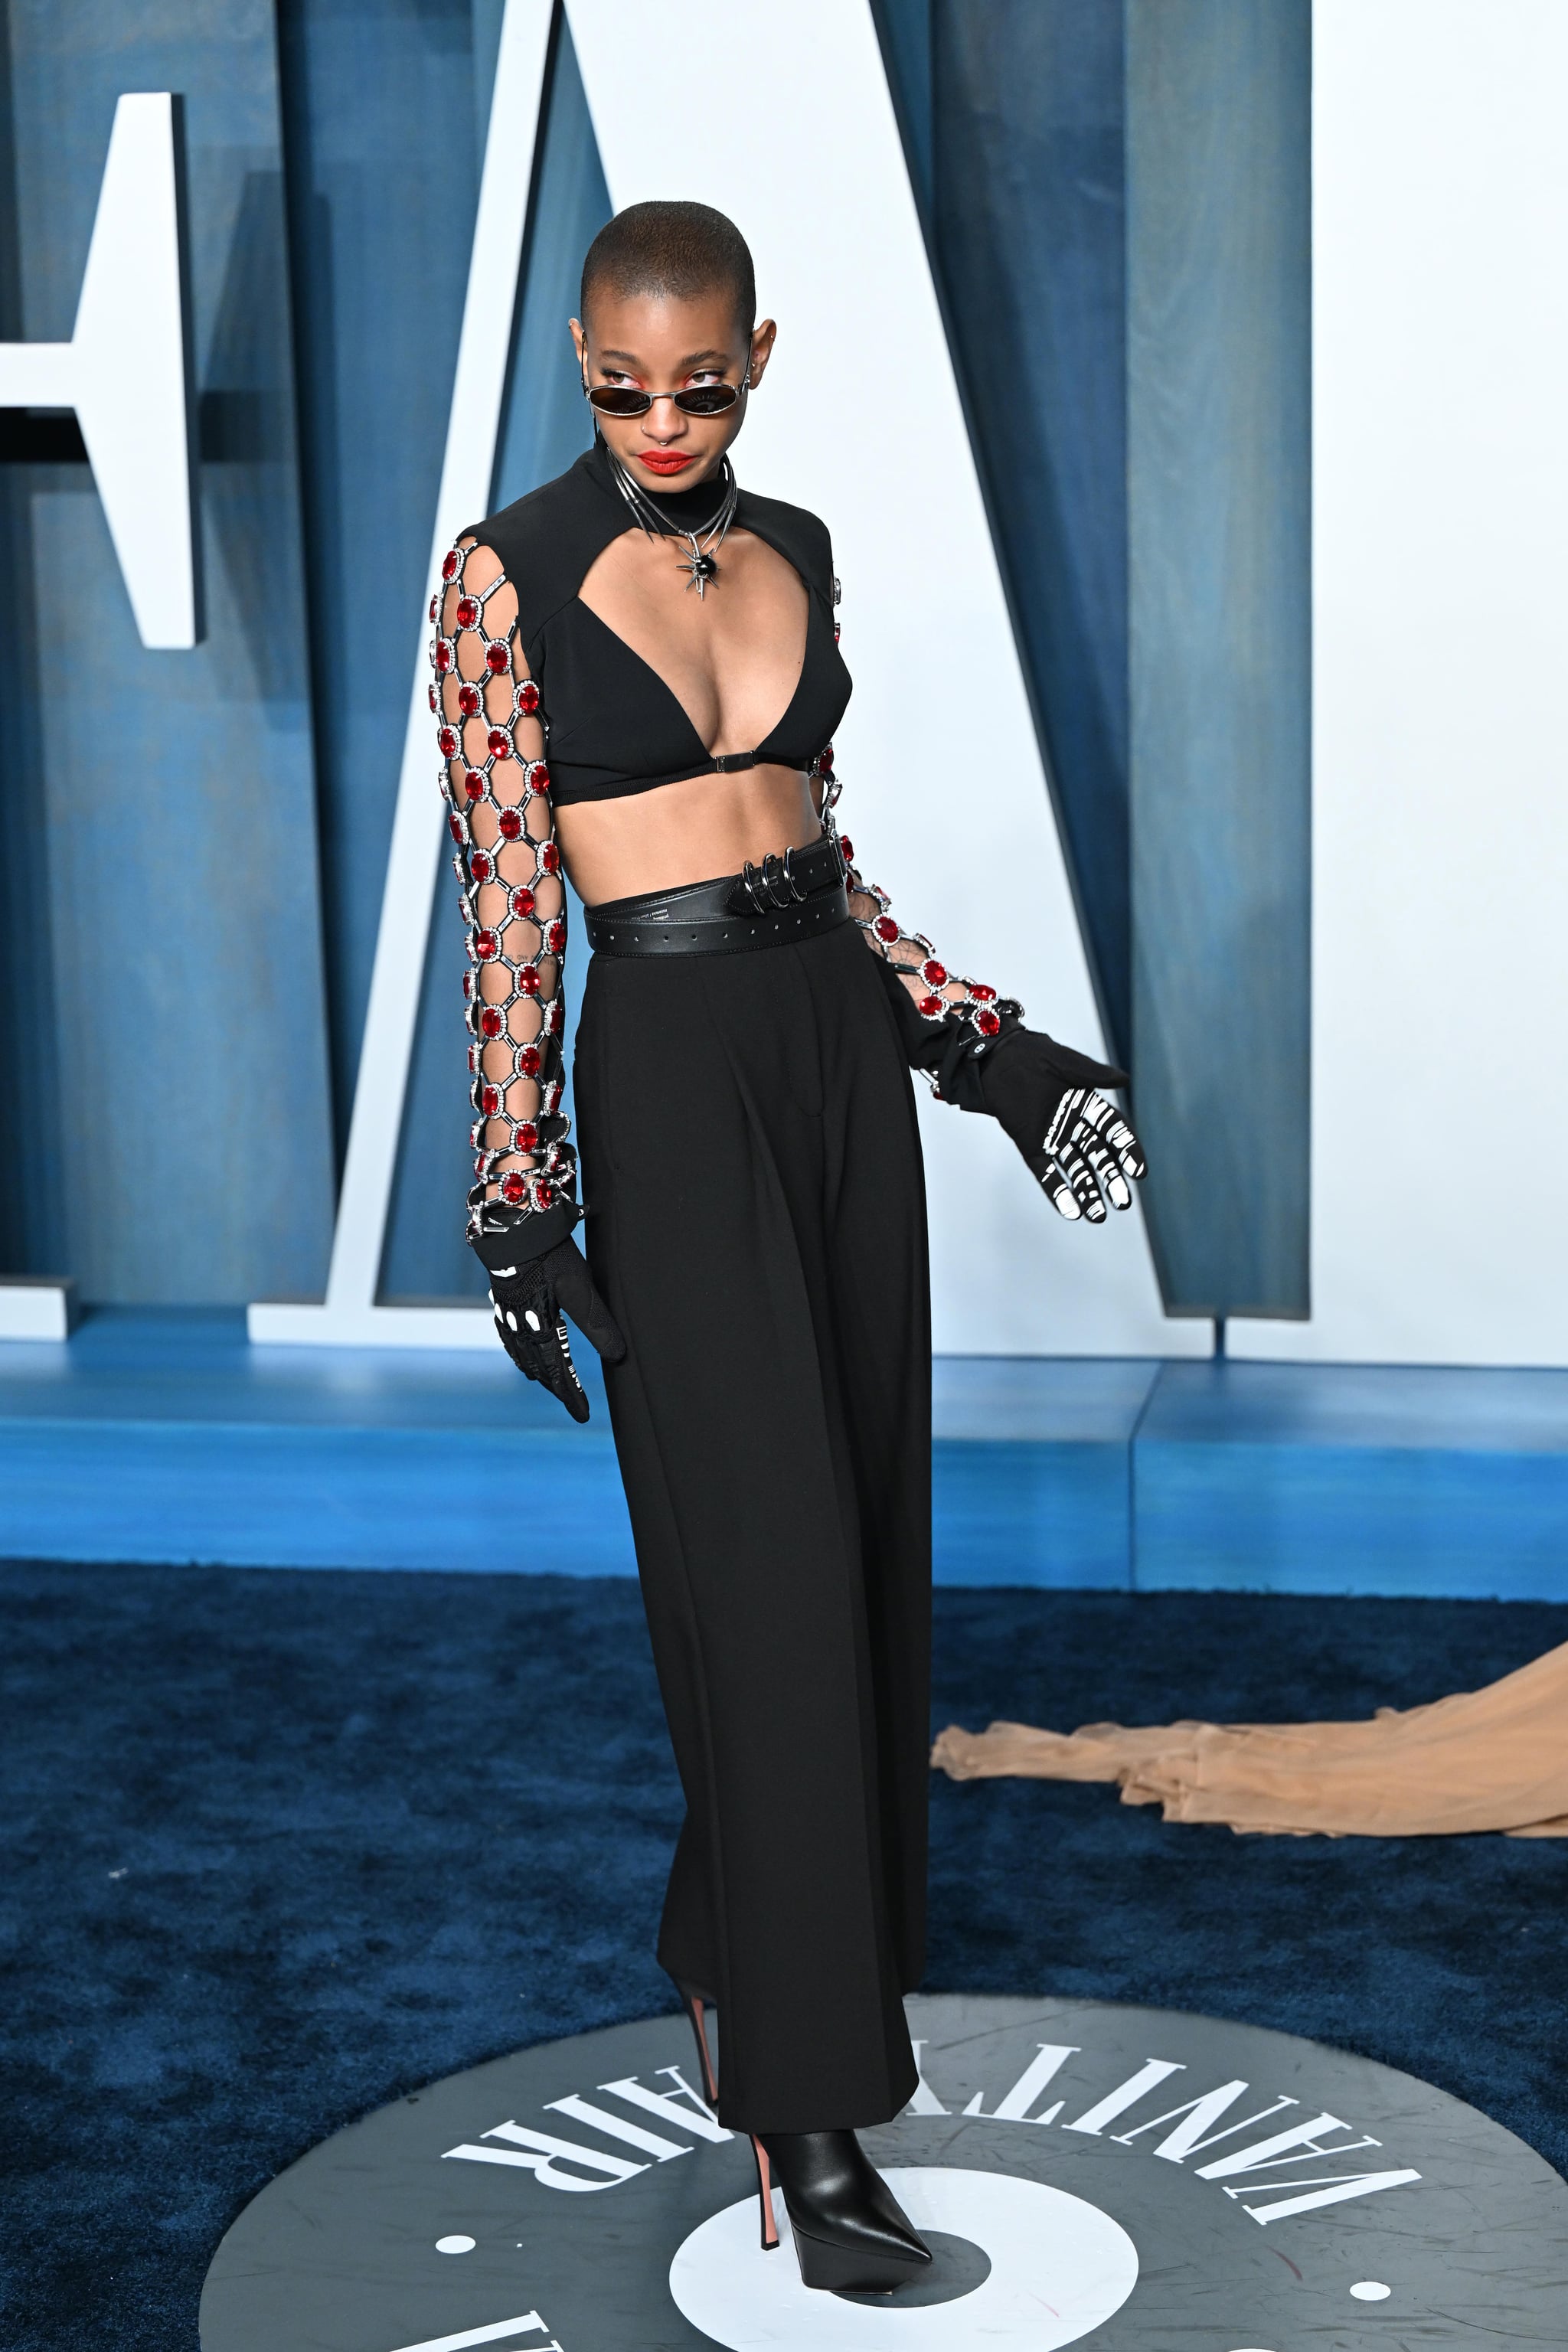 Willow Smith | Top 13 best dressed female musicians of 2022